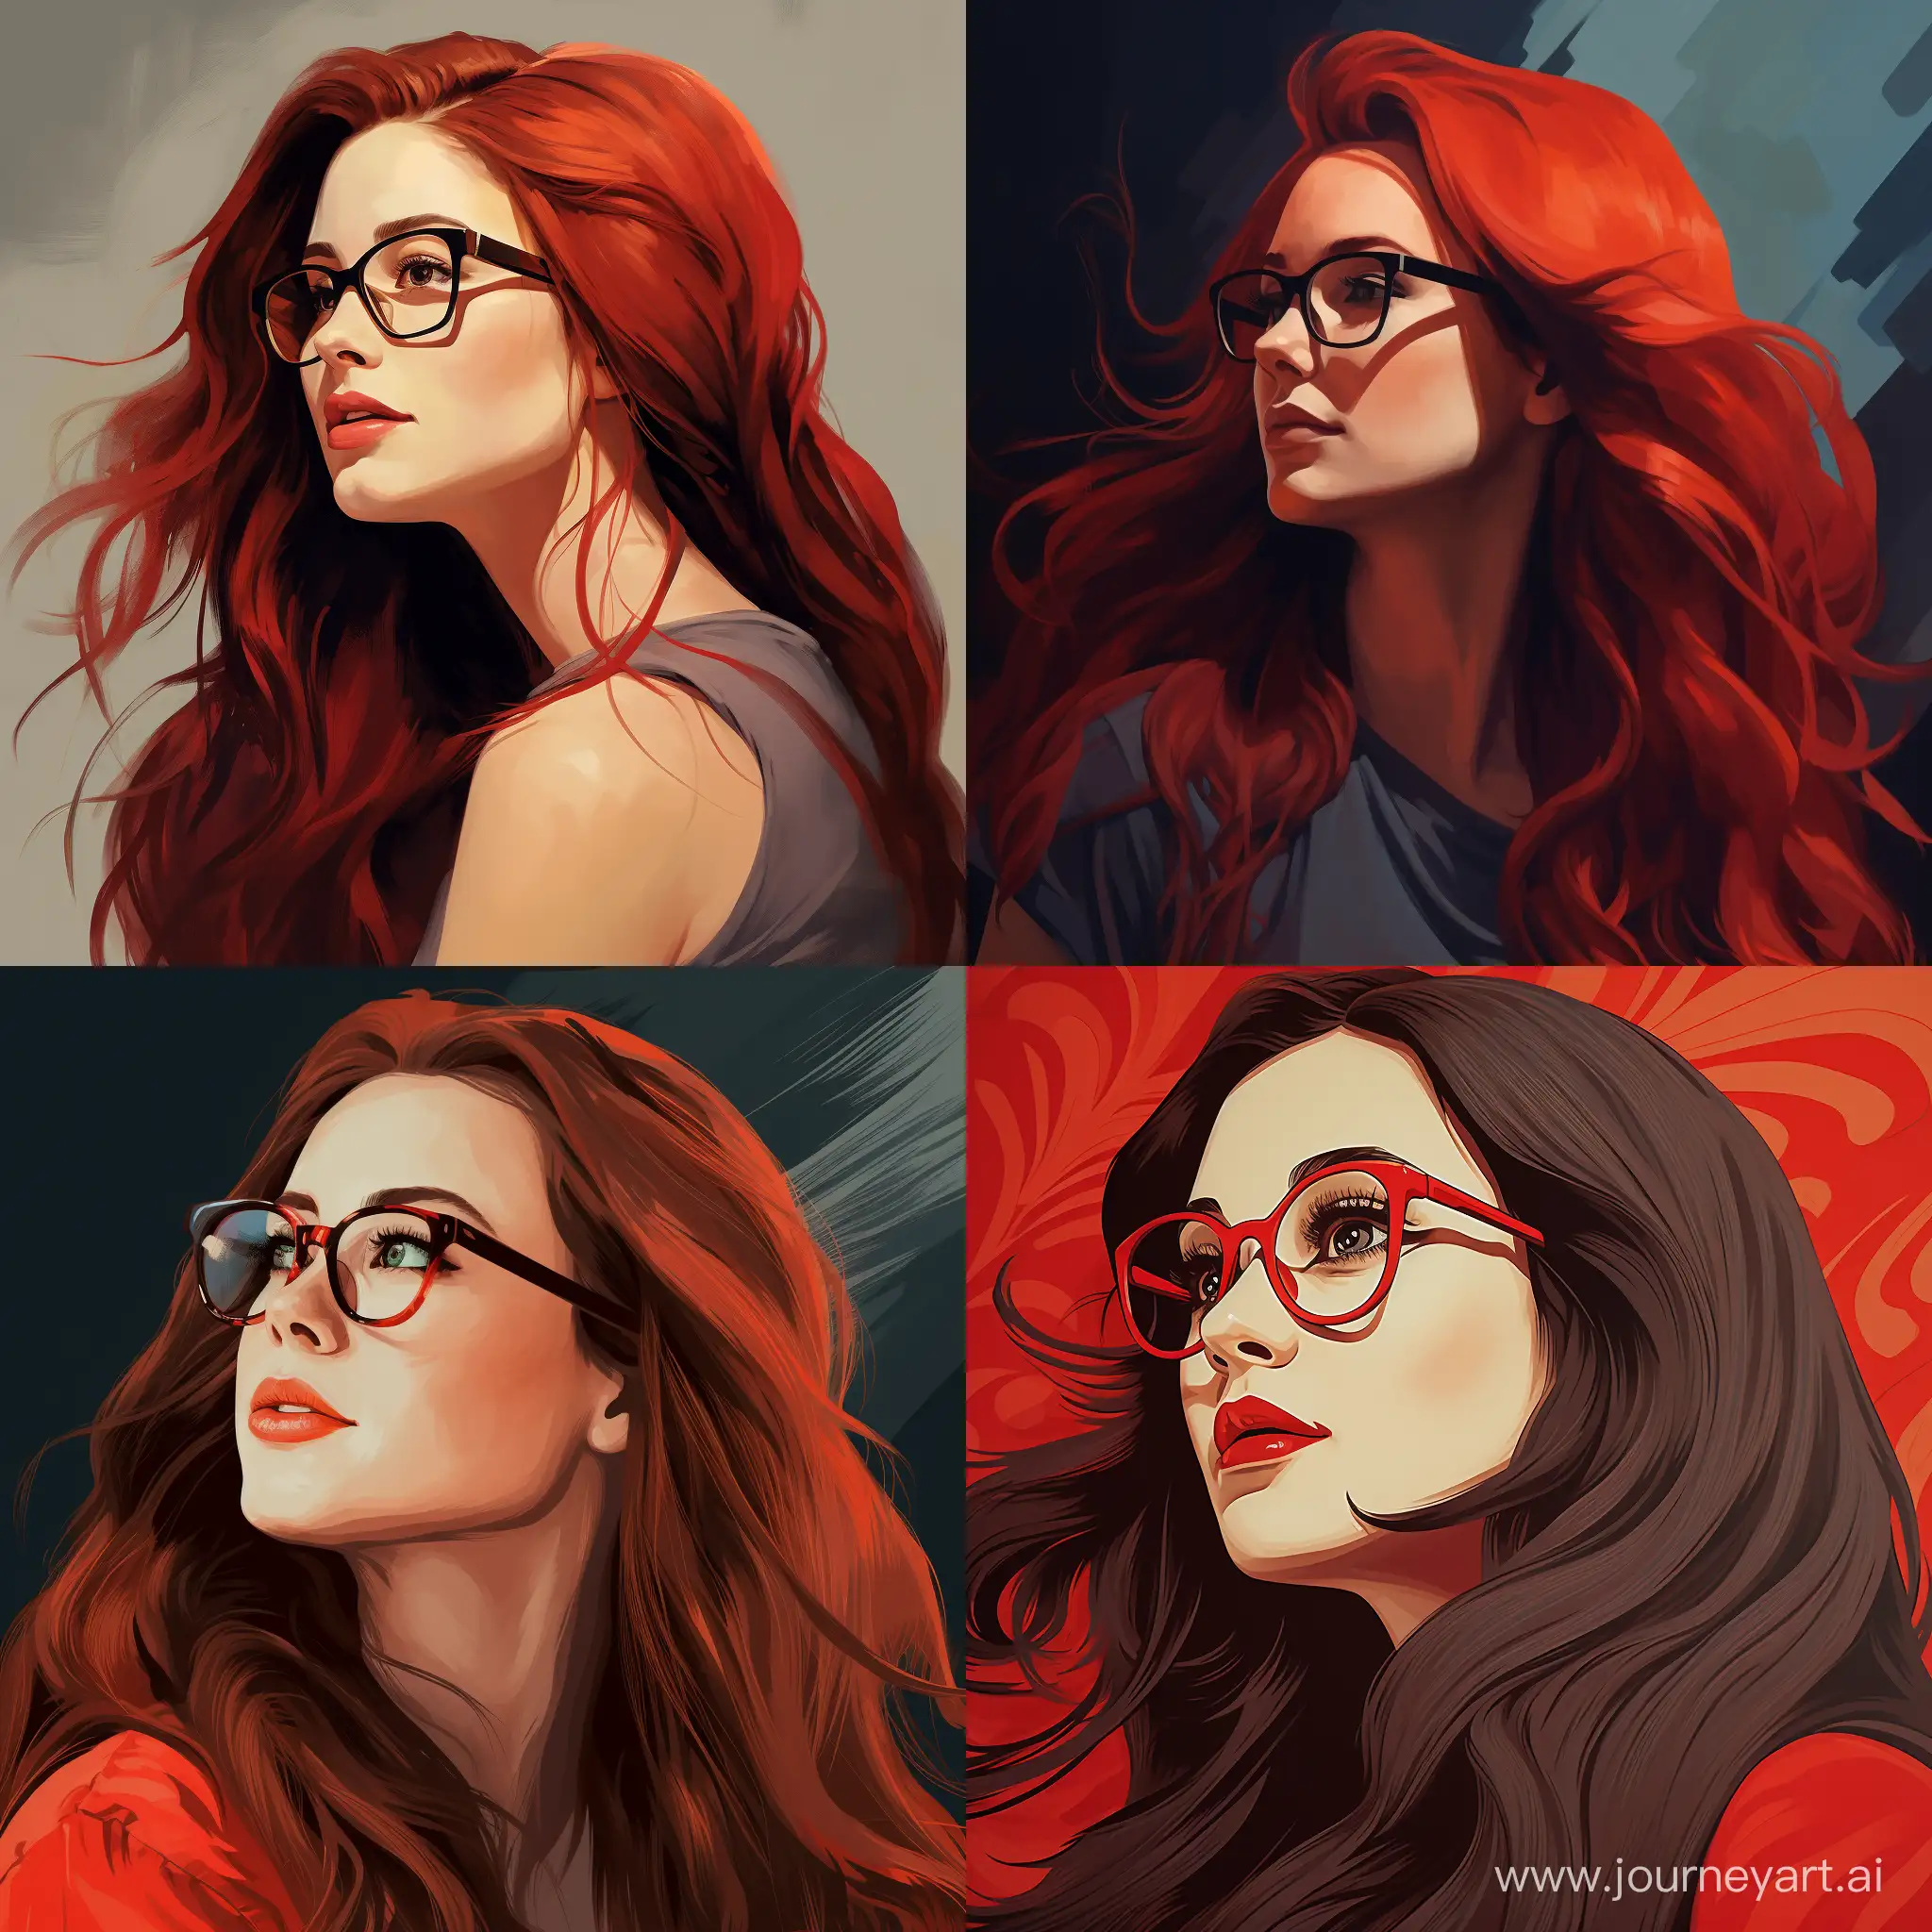 Stylish-Woman-in-Her-30s-with-Red-Glasses-and-Long-Hair-Profile-Picture